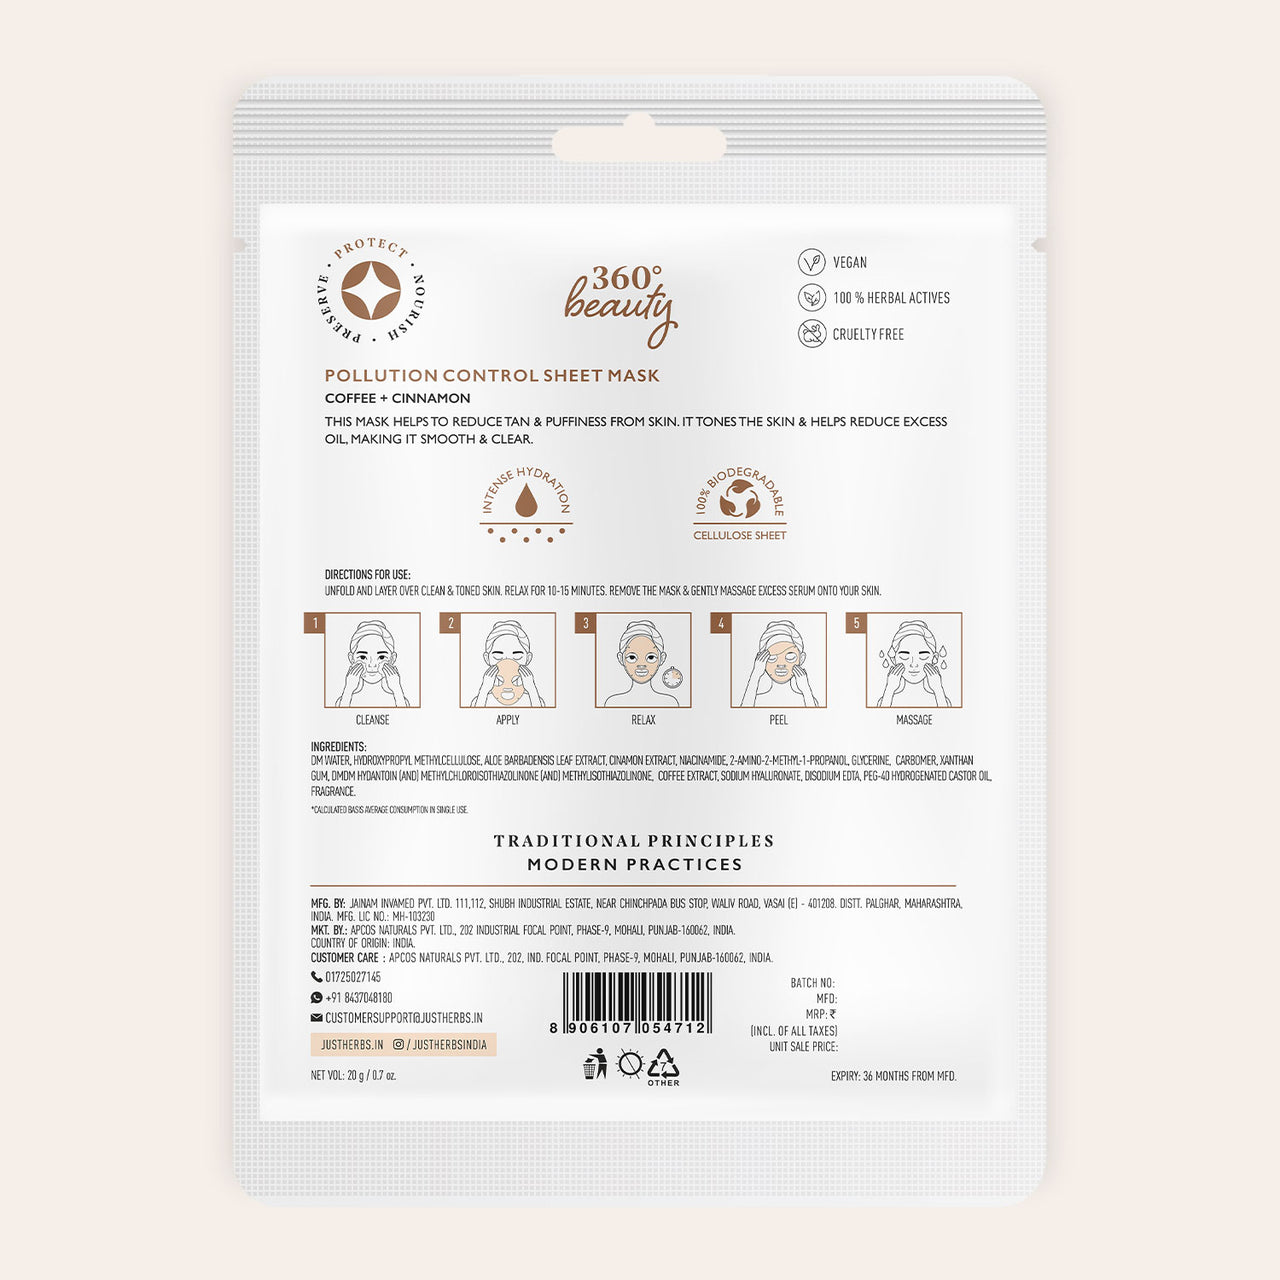 Coffee Sheet Mask with Cinnamon For Pollution Control - Pack of 1